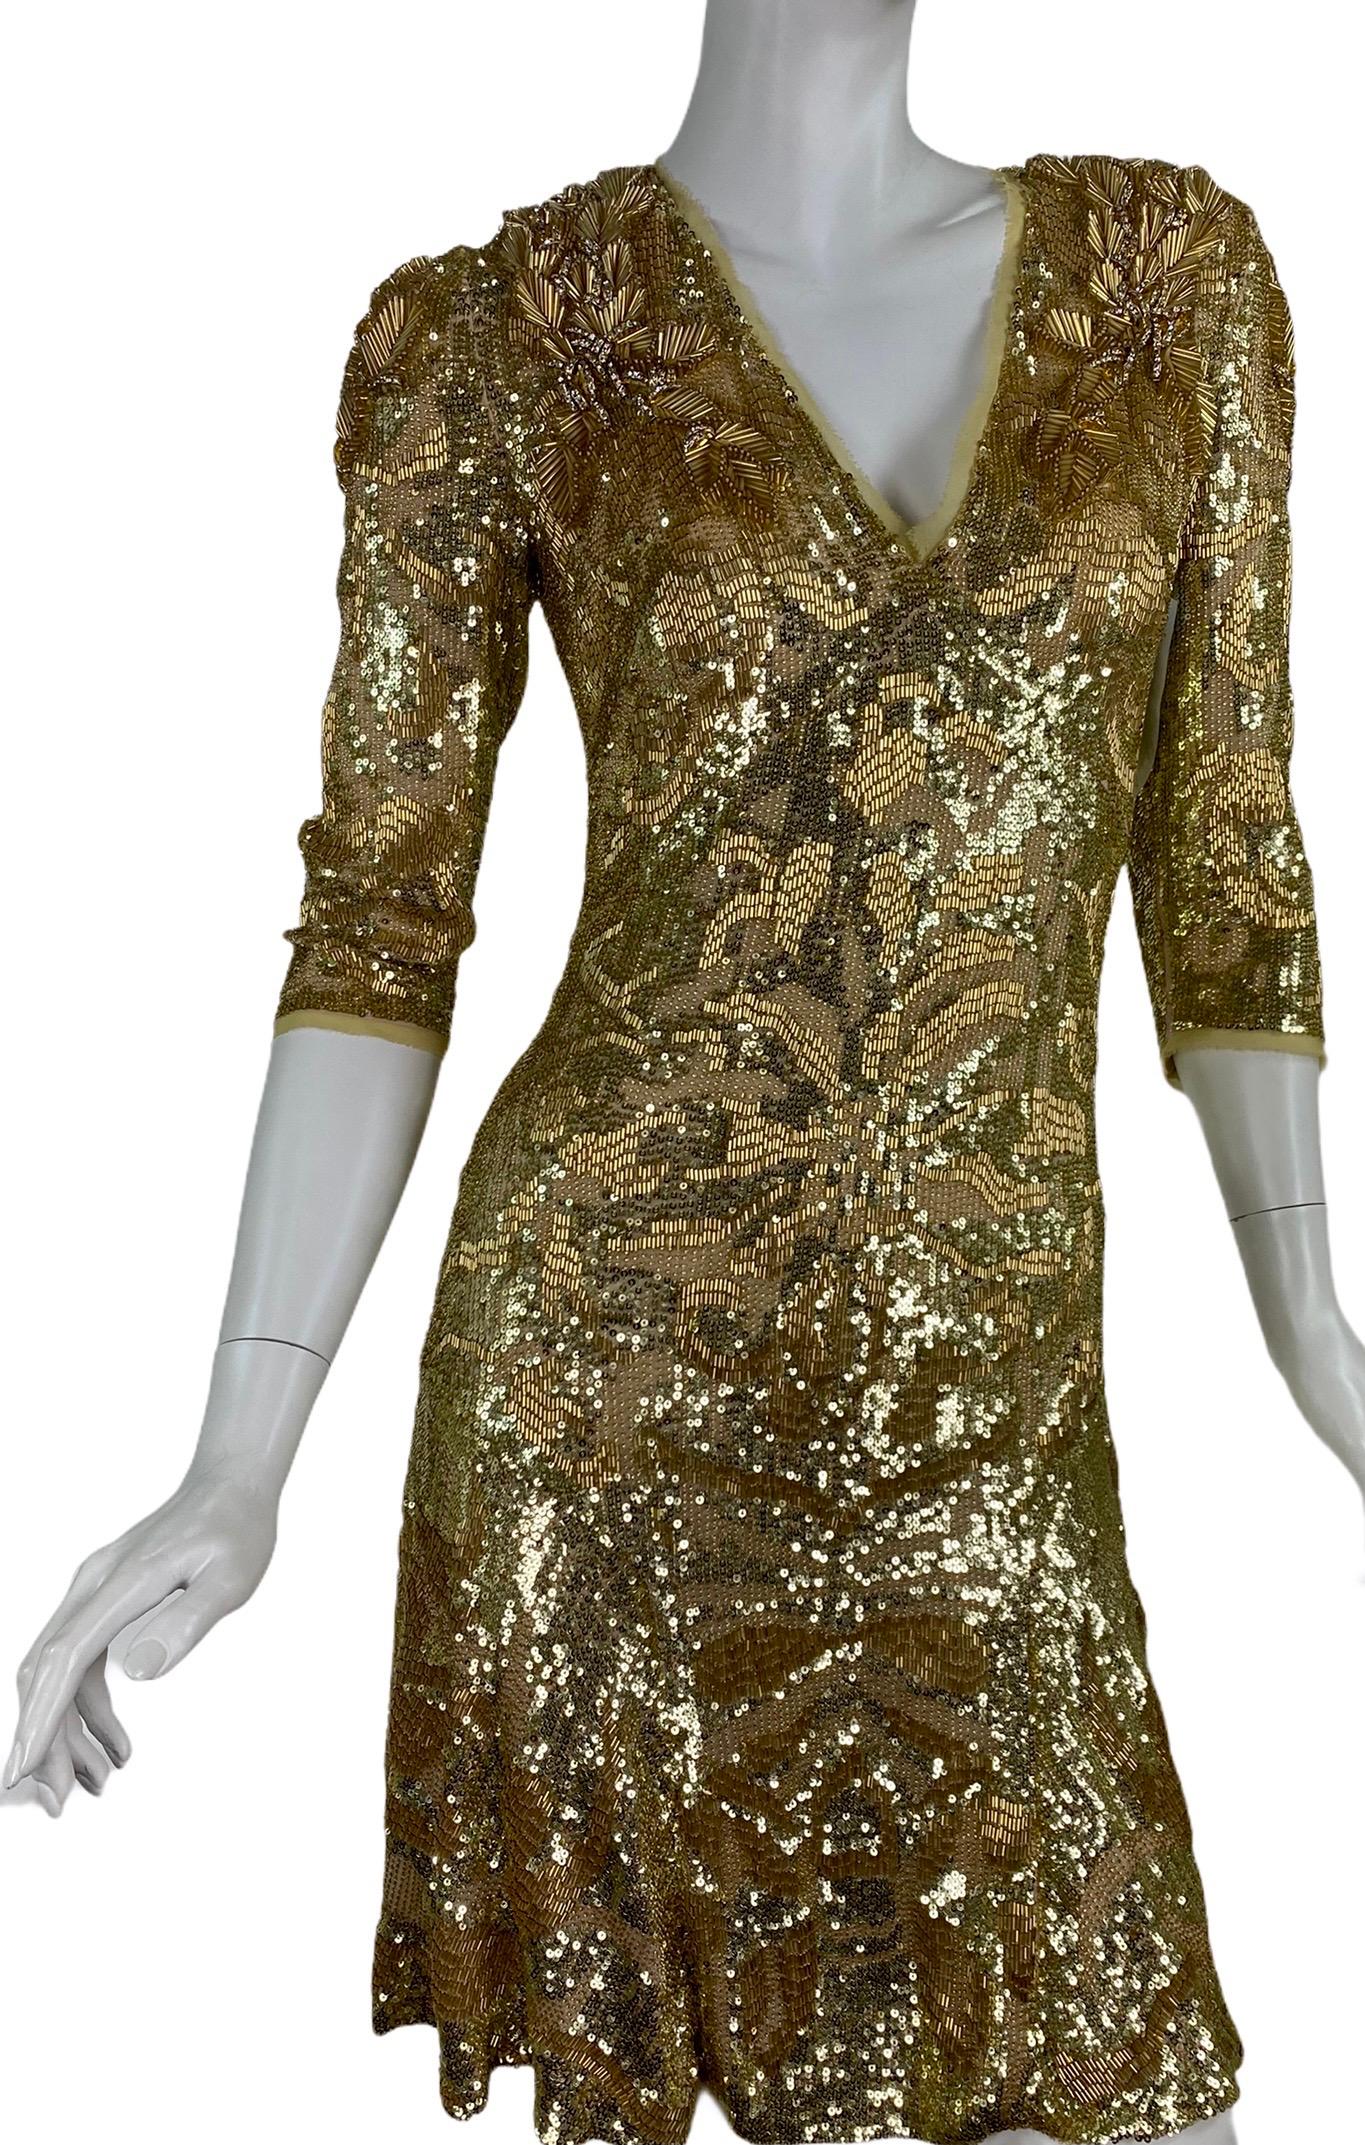 Emilio Pucci Embellished dress in Gold
Editor’s note: Sequins, beads and crystals.
Details: V-neck, 3/4 sleeves, Content: 92% silk, 8% elastane.
It Size: 40 – US 4
Length: 36″, Armpit to armpit: up to 18″, Waist: up to 30″, Hips up to : 38″
Made in